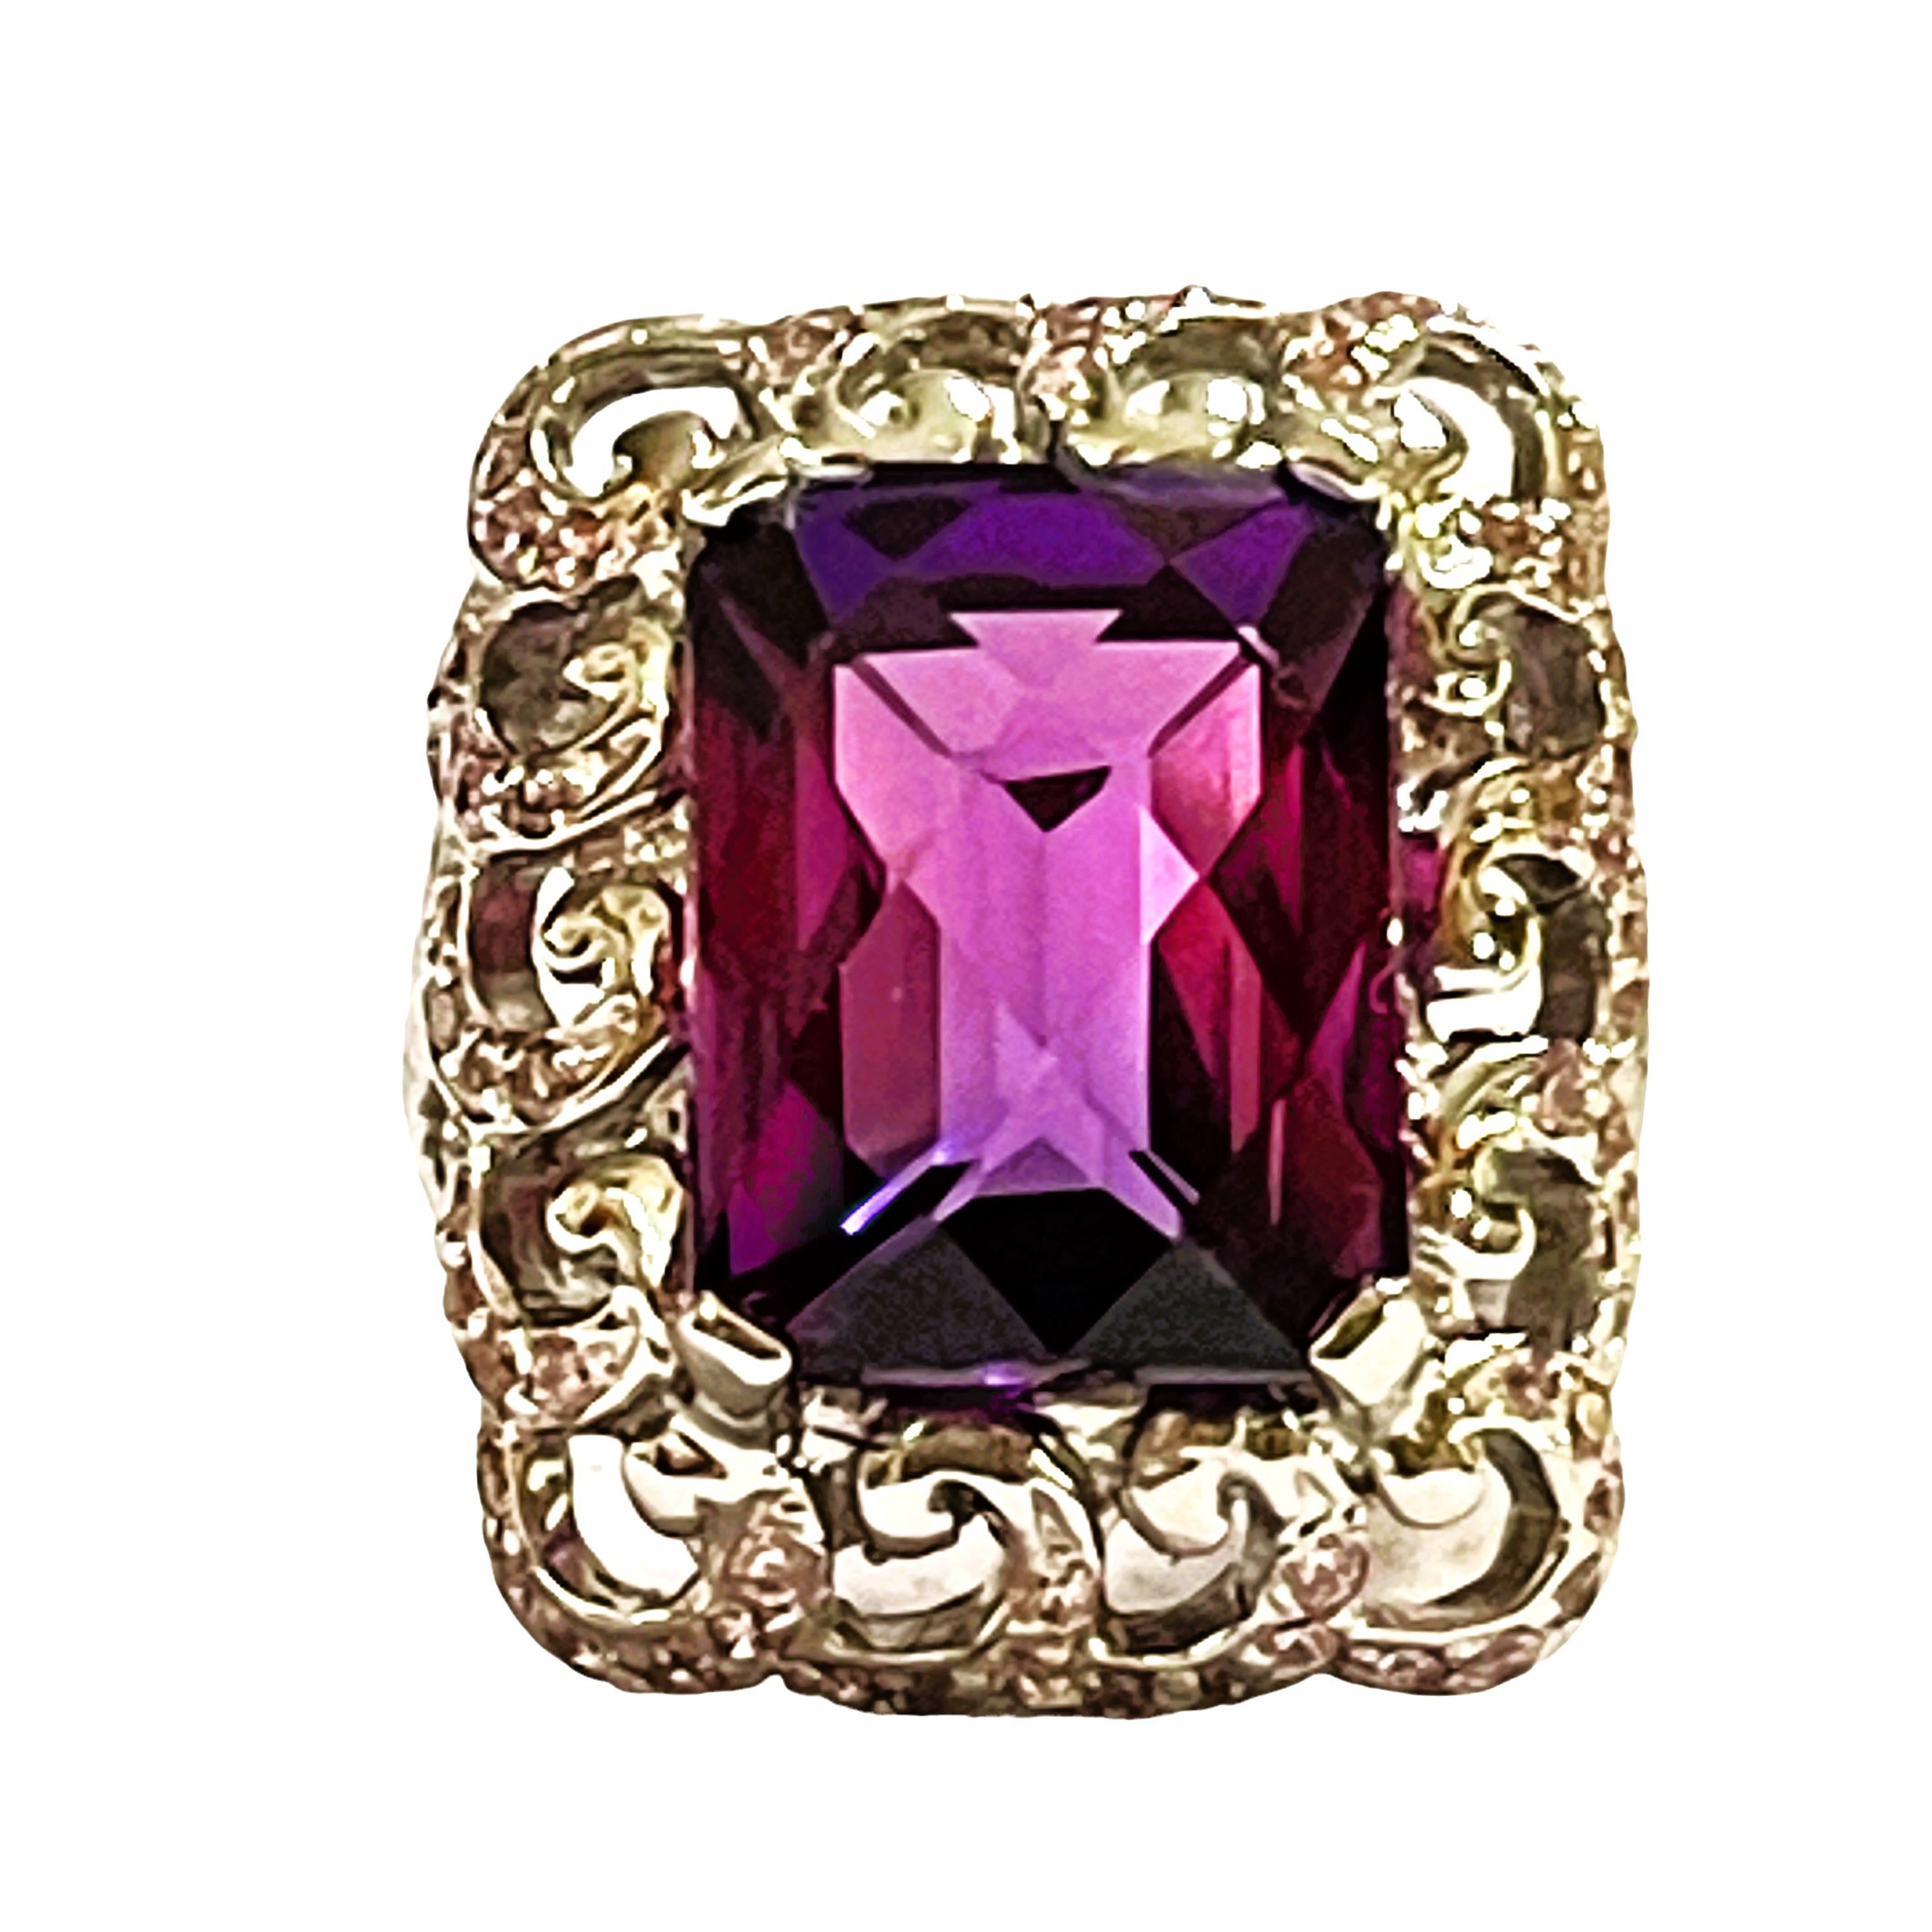 What beautiful color stones in this ring!  The ring is a size 6.25. The stones are from Africa and is just exquisite.  The stone is a fancy cut stone and is 12.80 cts.  They main stones are 13.7 x 10.5 mm..  It is in a beautiful filigree setting The